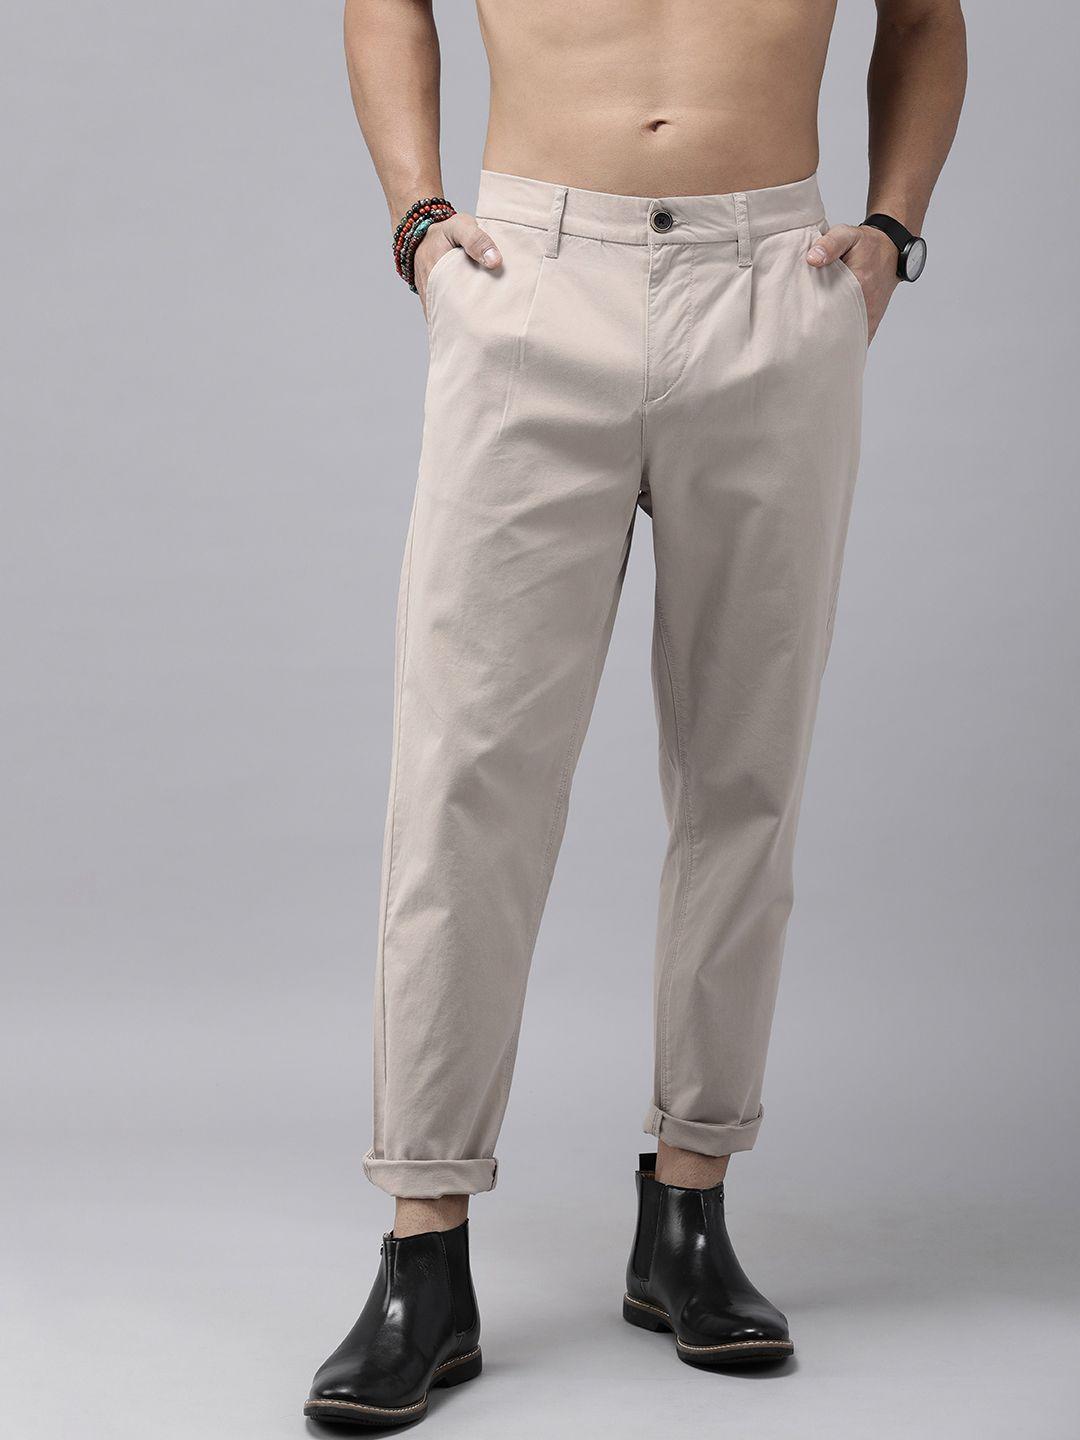 the roadster lifestyle co. men solid relaxed fit pleated chinos trousers